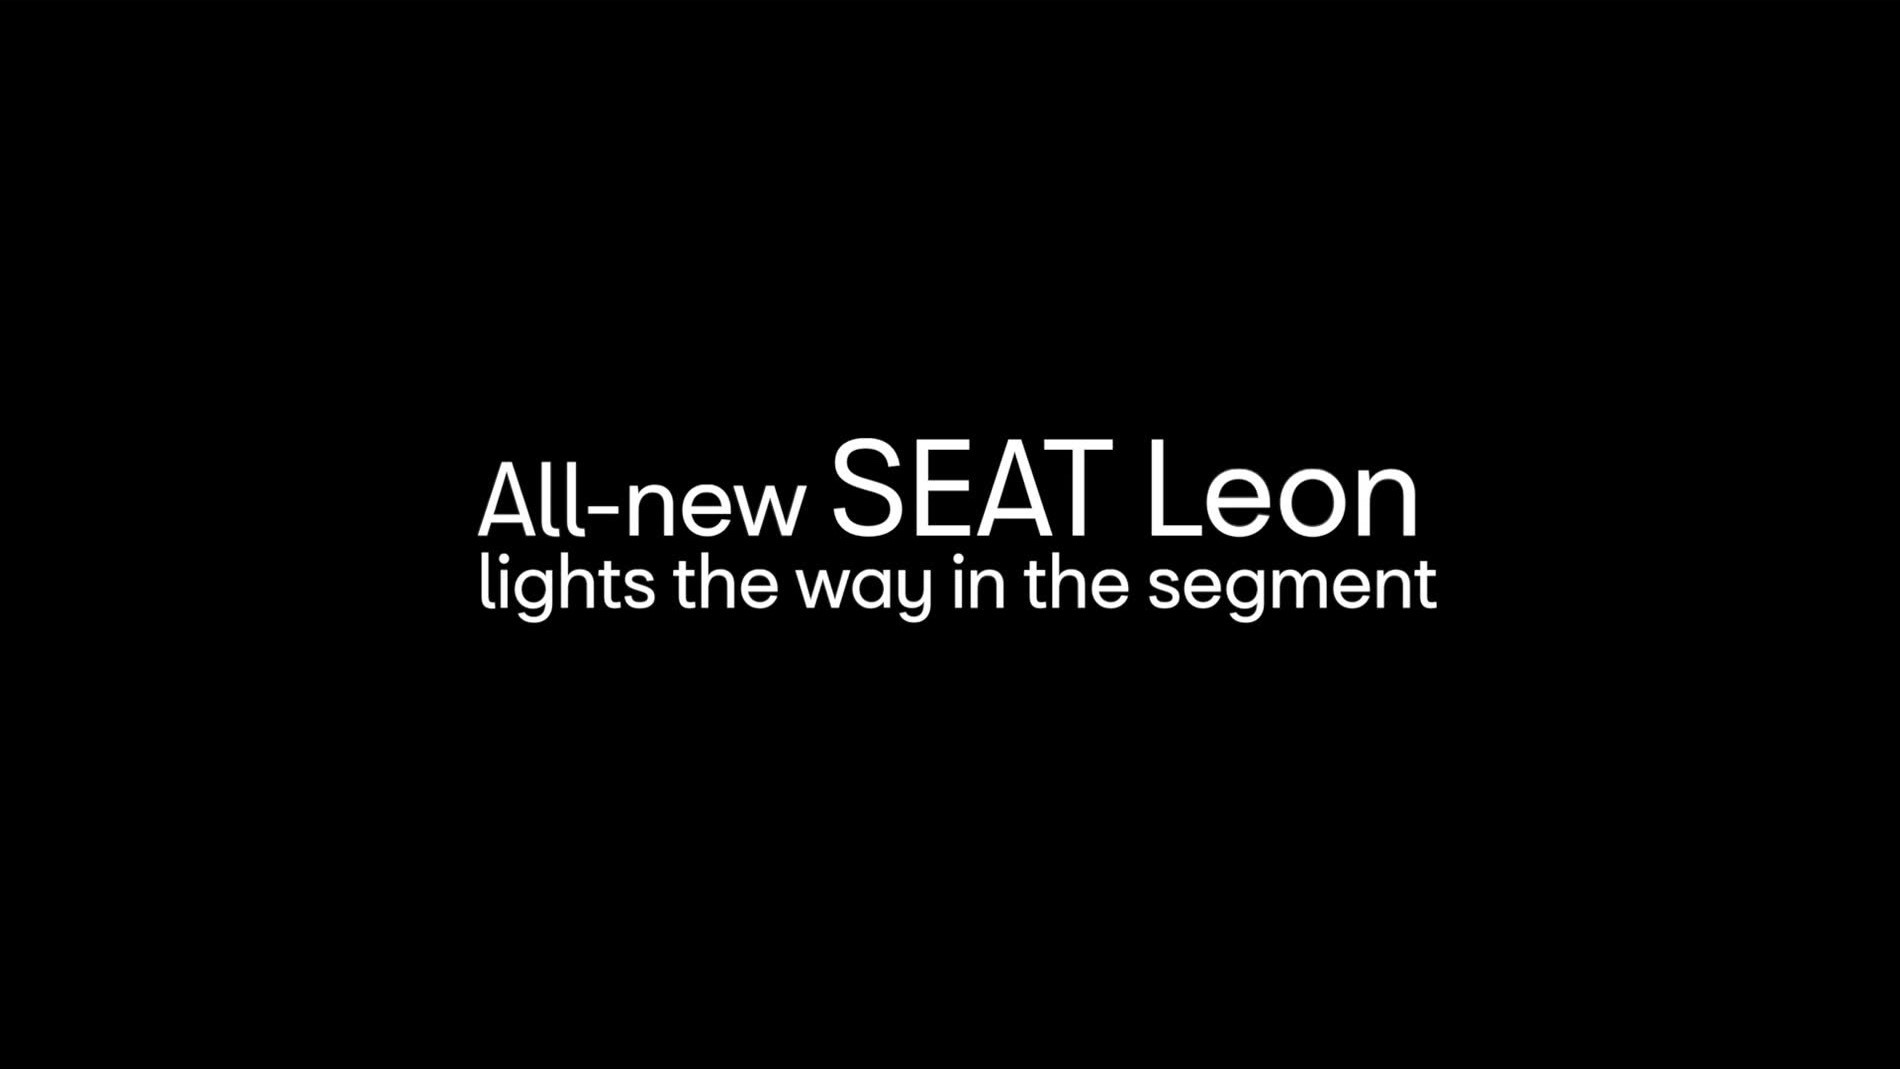 All-new SEAT Leon lights the way in the segment